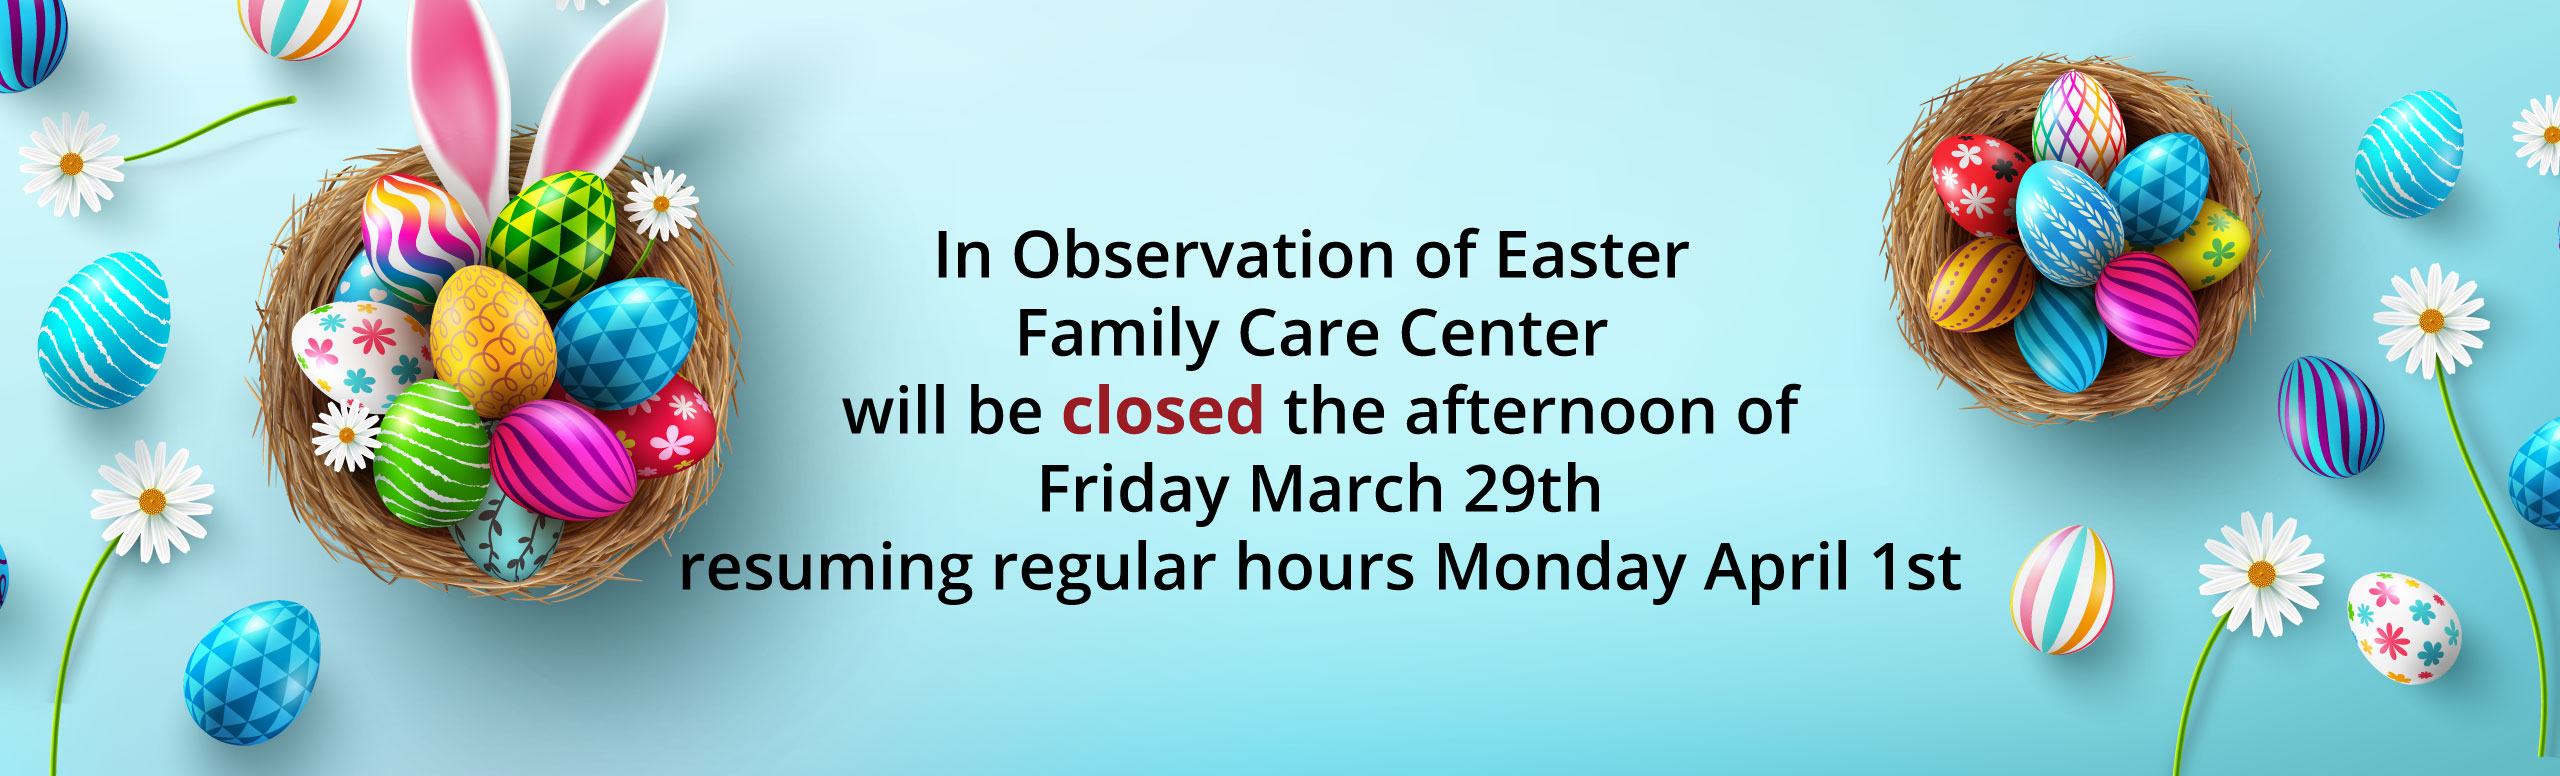 In Observation of Easter Family Care Center will be closed the afternoon of Friday March 29th resuming regular hours Monday April 1st